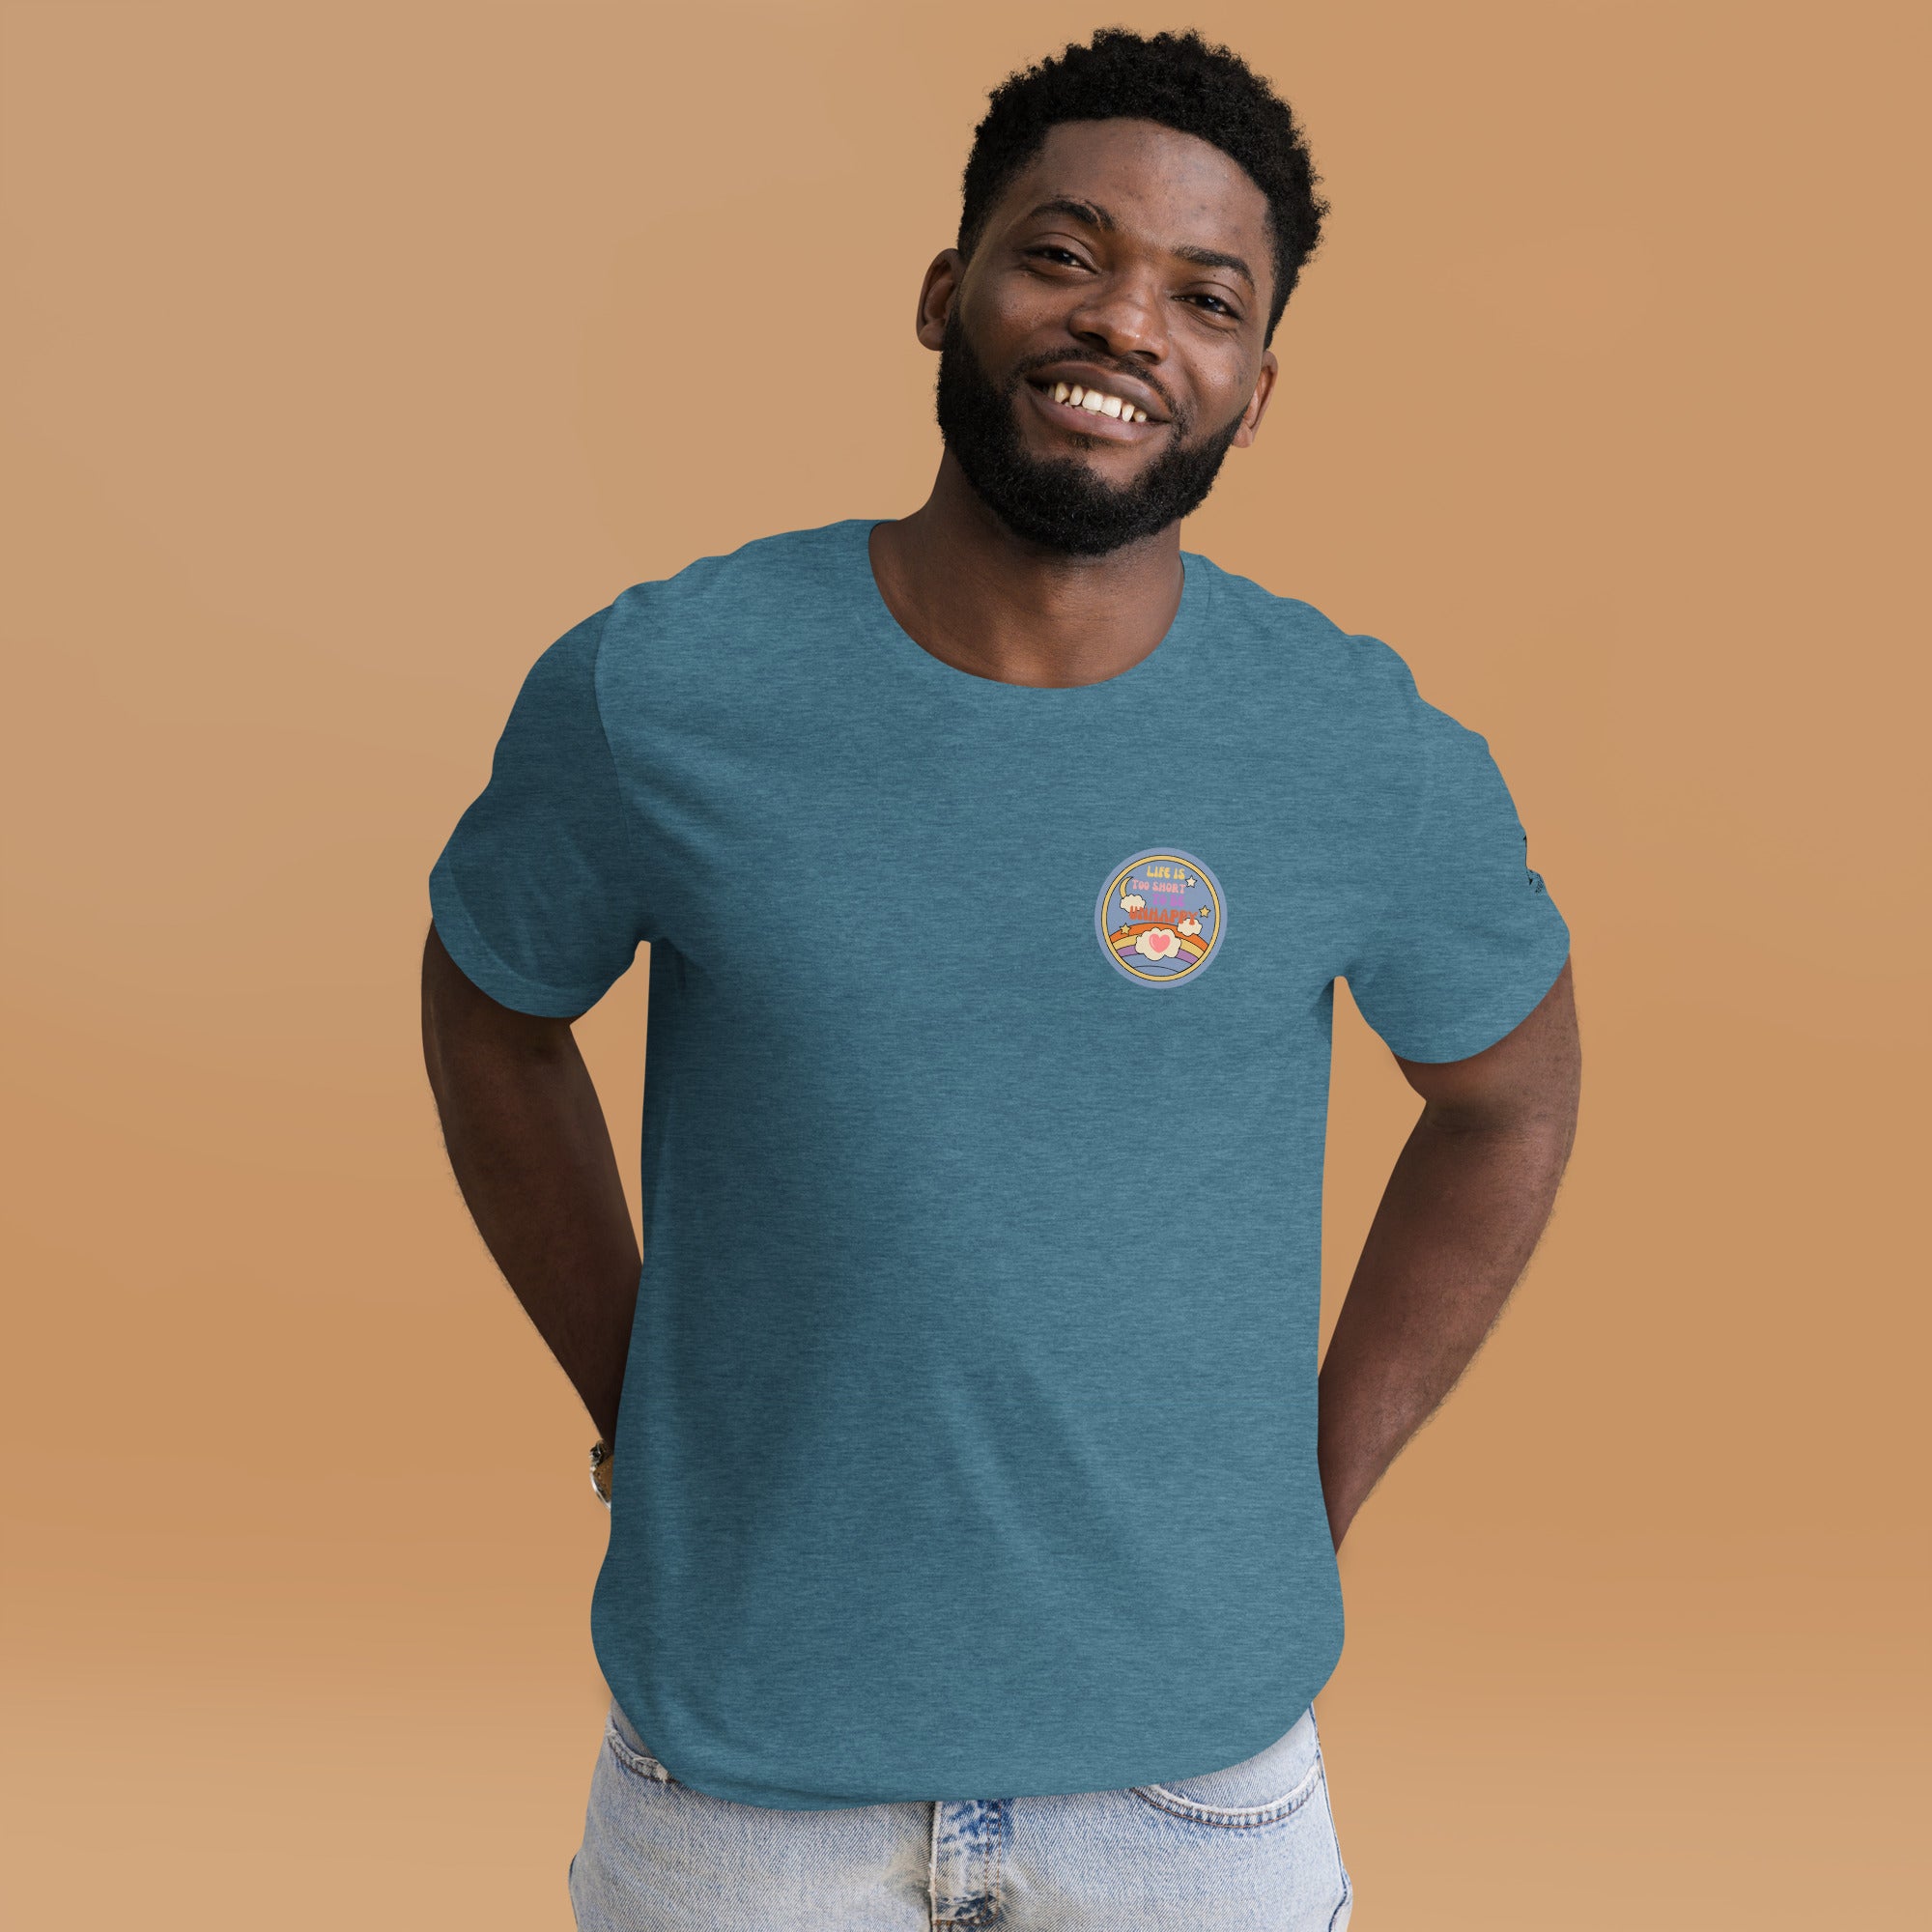 Life is Too Short T-Shirt